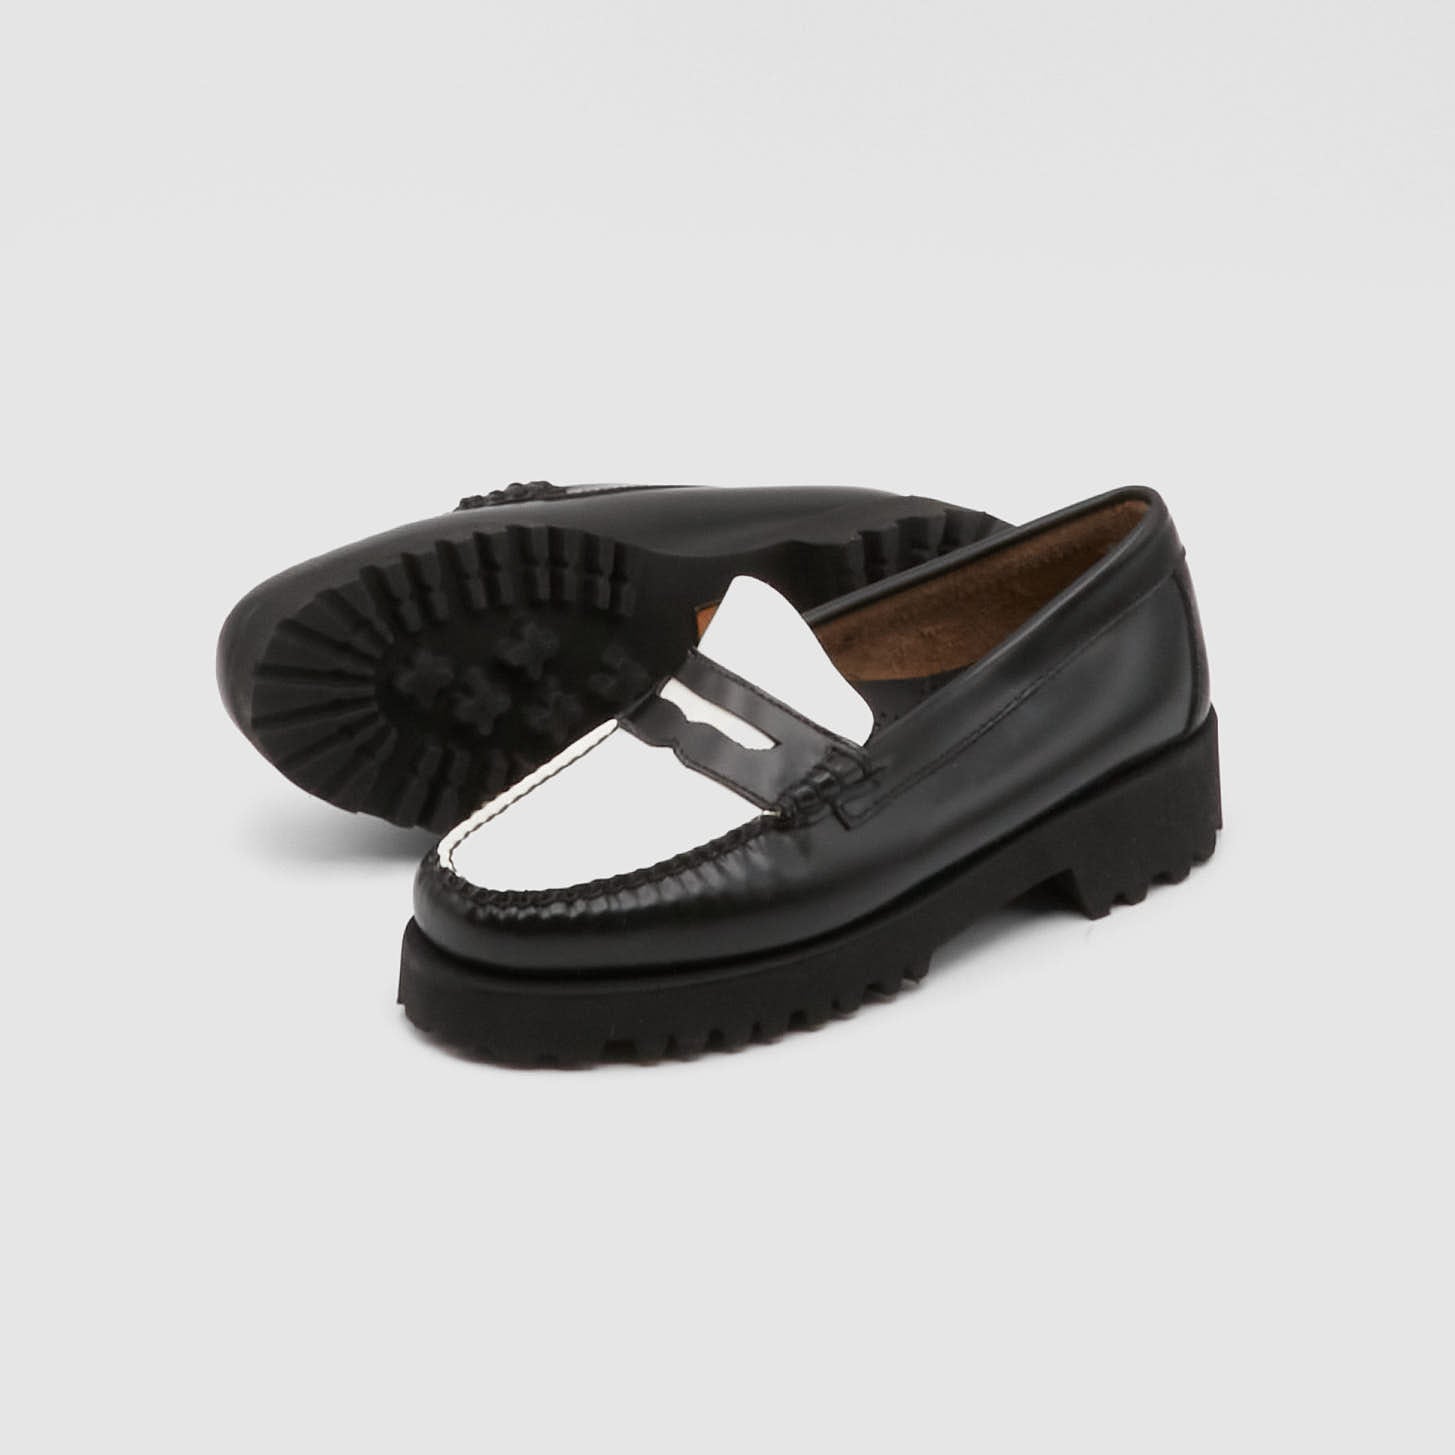 G.H. Bass & Co. Ladies Weejuns Lianna Penny Loafers - DeeCee style